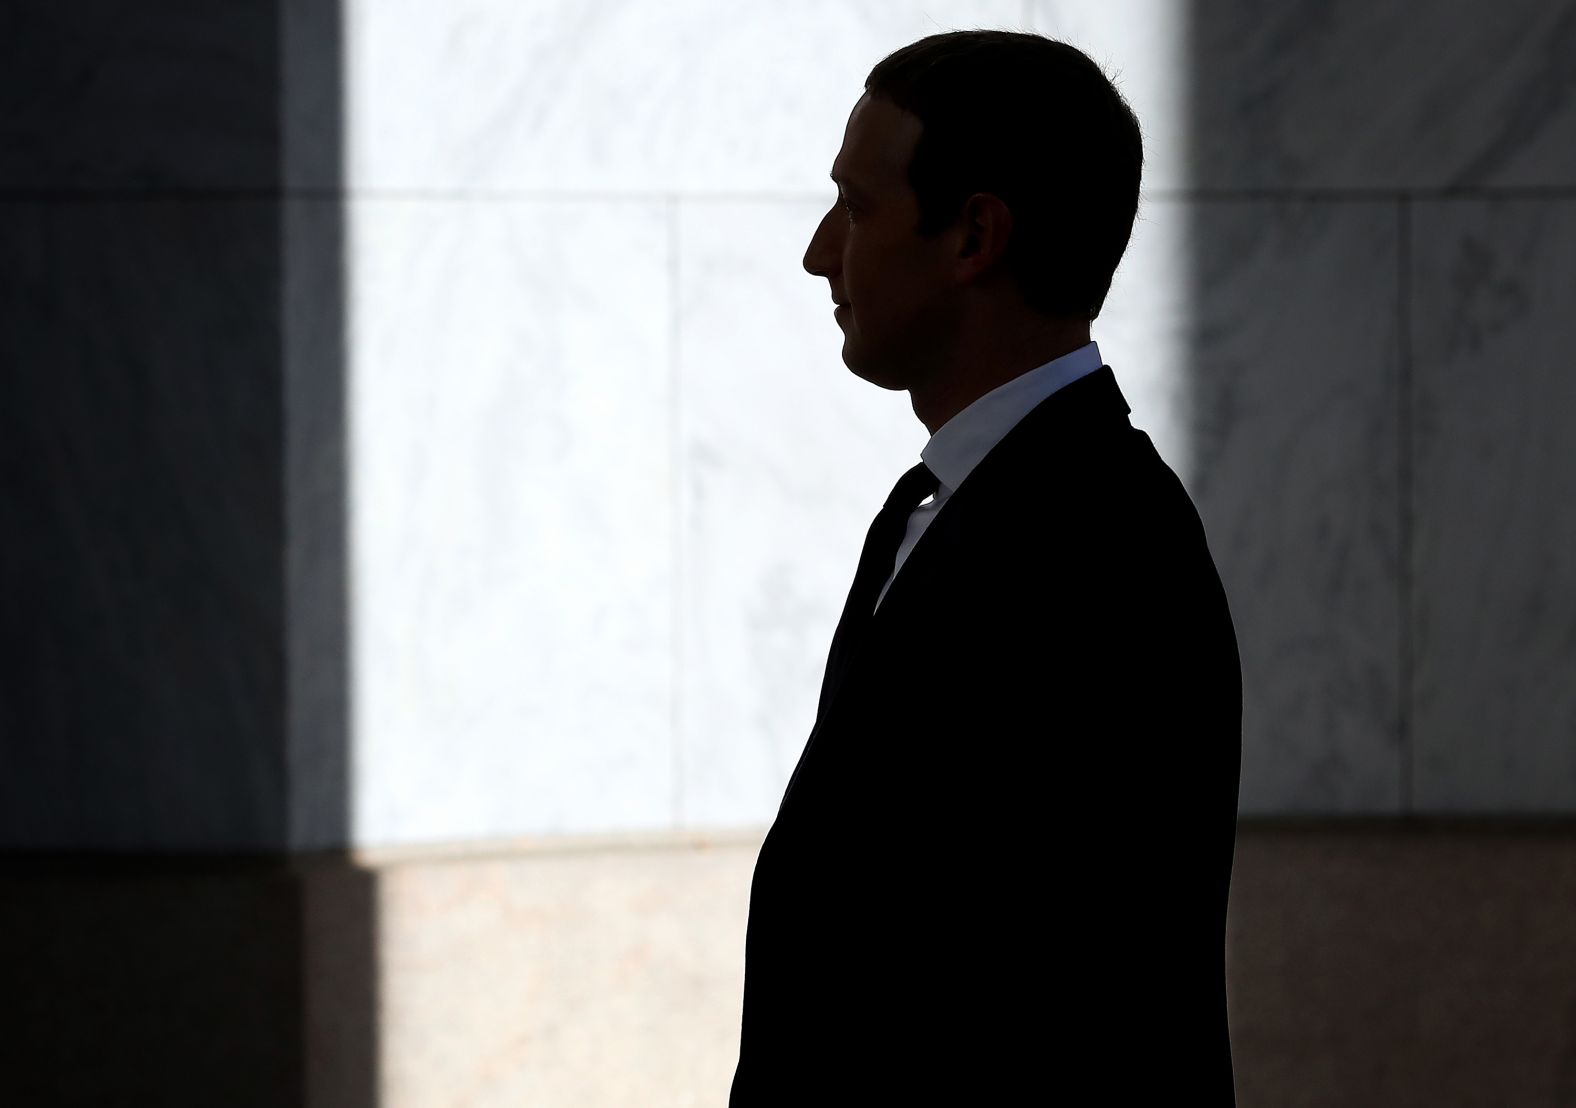 Zuckerberg arrives to testify before a US House committee in 2019. <a href="https://www.cnn.com/2019/10/23/tech/mark-zuckerberg-facebook-libra-hearing/" target="_blank">Zuckerberg conceded</a> that there was a scenario in which Facebook would have to rethink its involvement in its controversial cryptocurrency project, Libra.